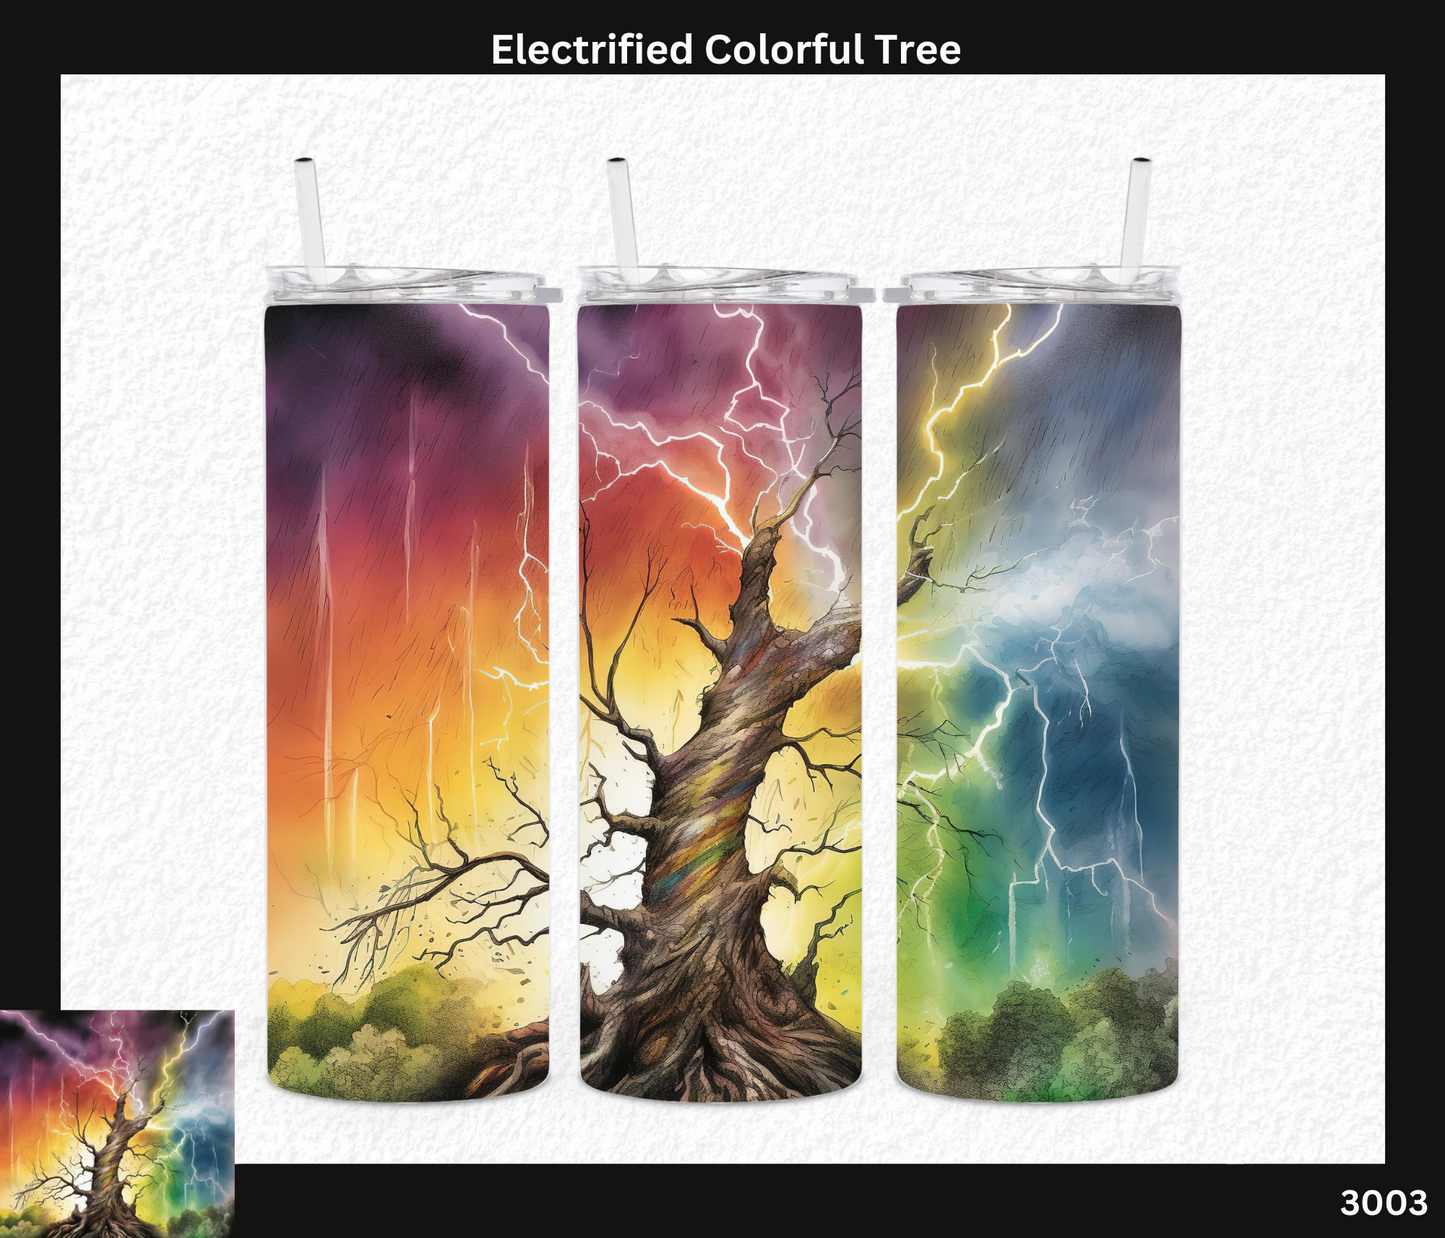 Electrified Colorful Tree